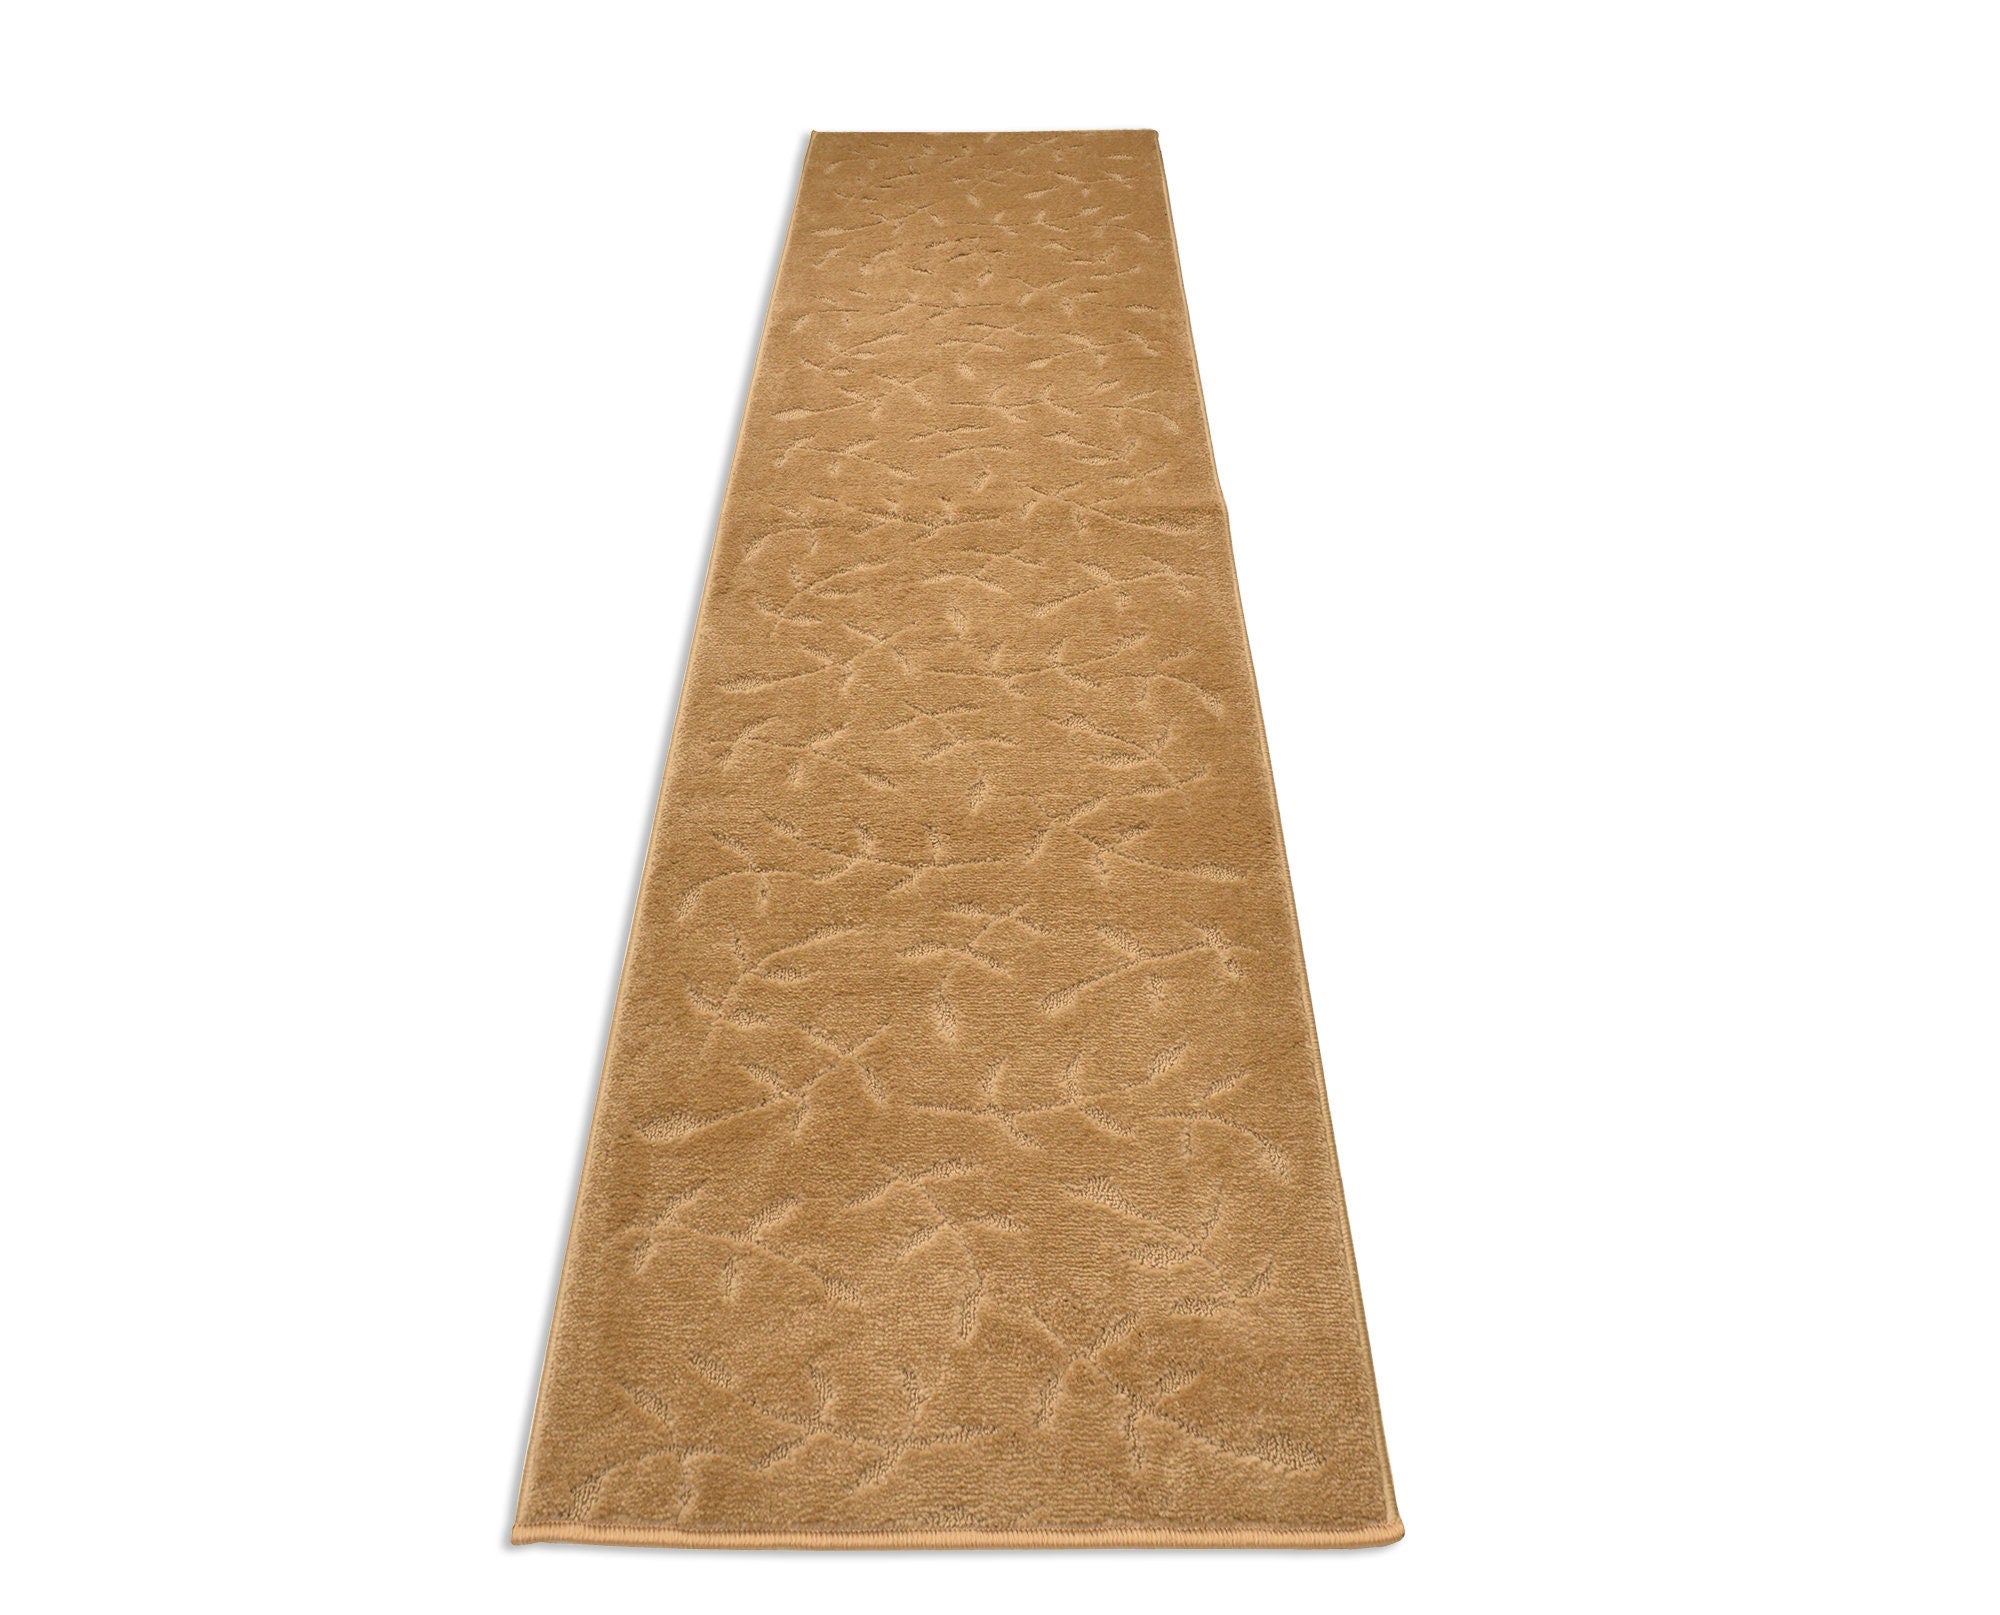 Custom Size Runner Rug Solid Floral Scroll Beige Color Skid Resistant Rug Runner Customize Up to 50 Feet and 25 Inch Width Cut to Size Rugs